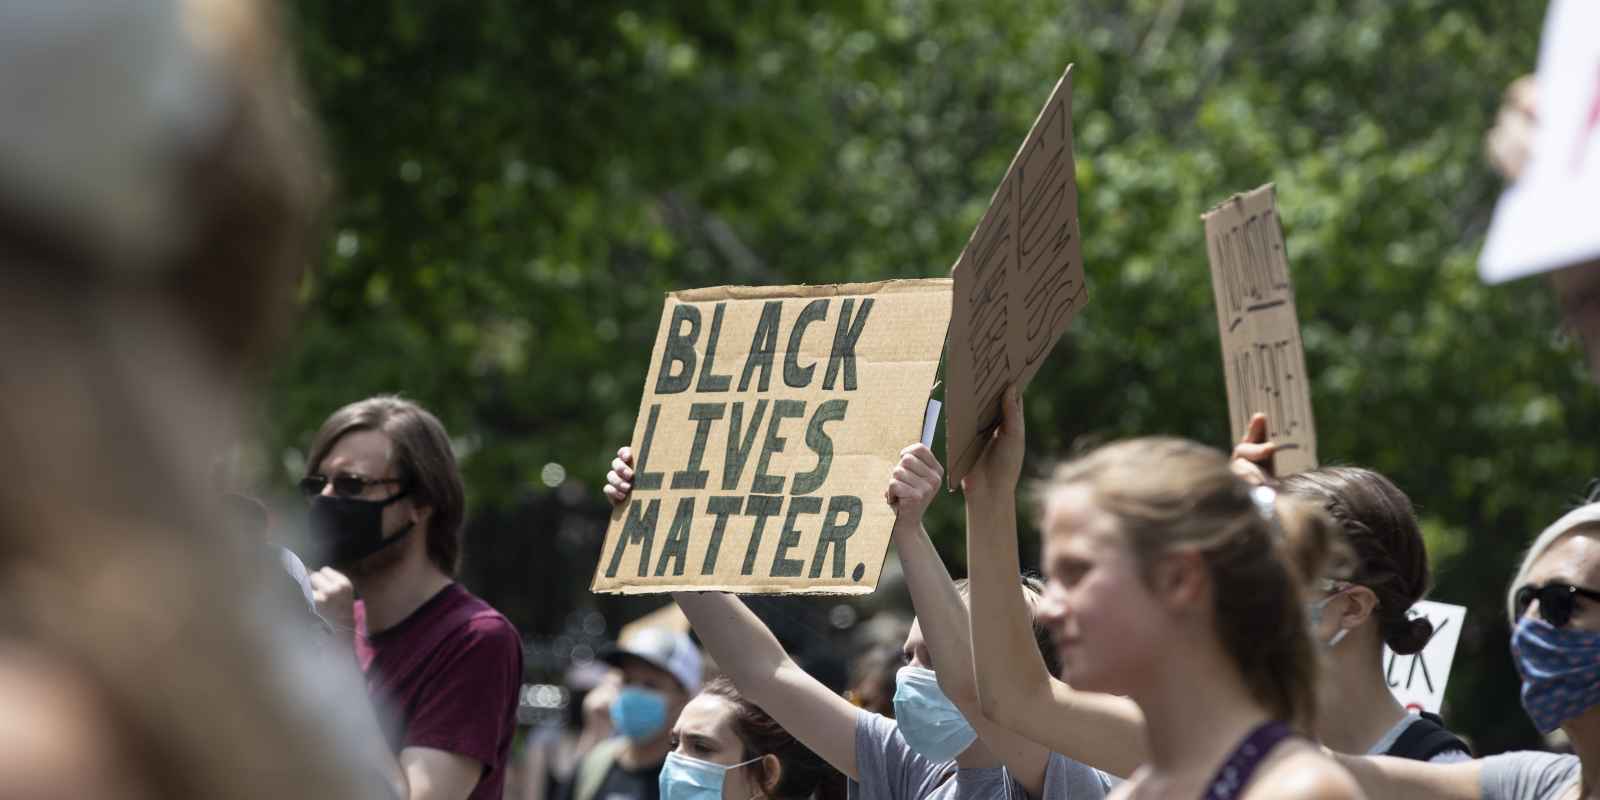 Photo of people protesting and holding homemade signs. The sign in the middle says, "Black Lives Matter."